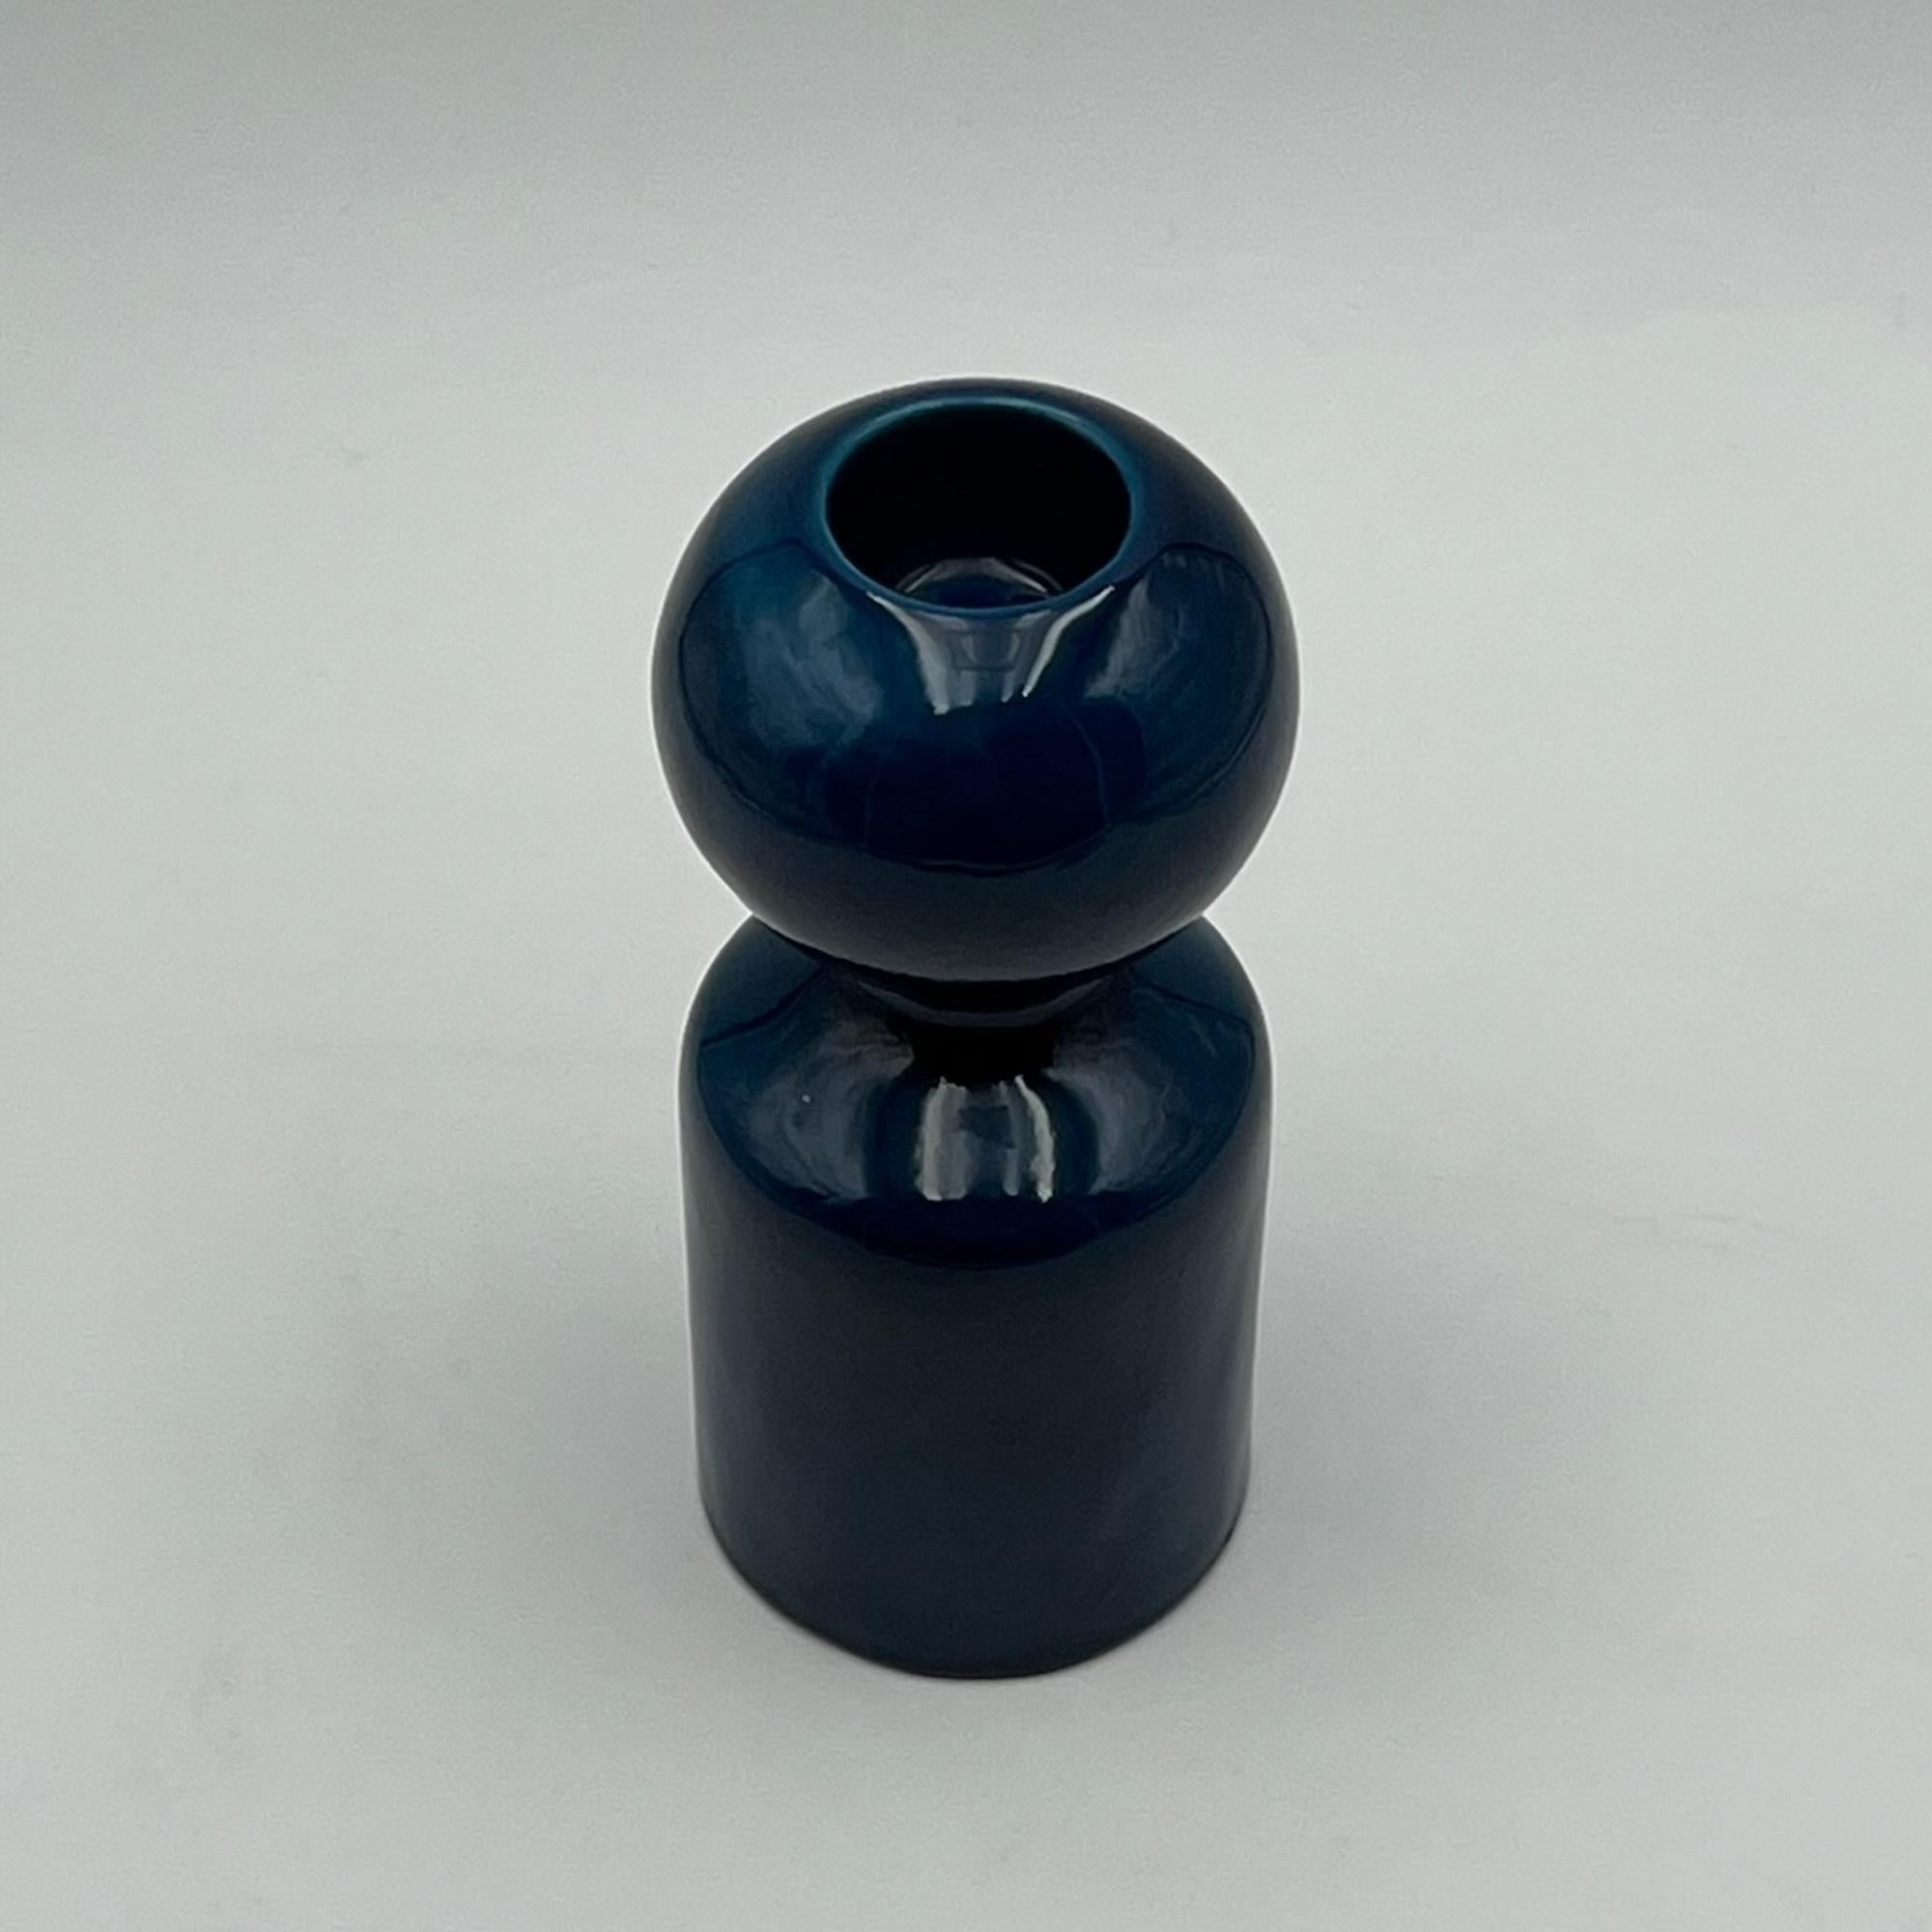 Liisi Beckmann’s exquisite ceramic vase/candle holder from the 1960s crafted by Gabbianelli.

This vintage ceramic vase feature a calming blue hue, showcases Beckmann’s visionary design sensibilities. The vases’ sinuous curves and flawless glaze